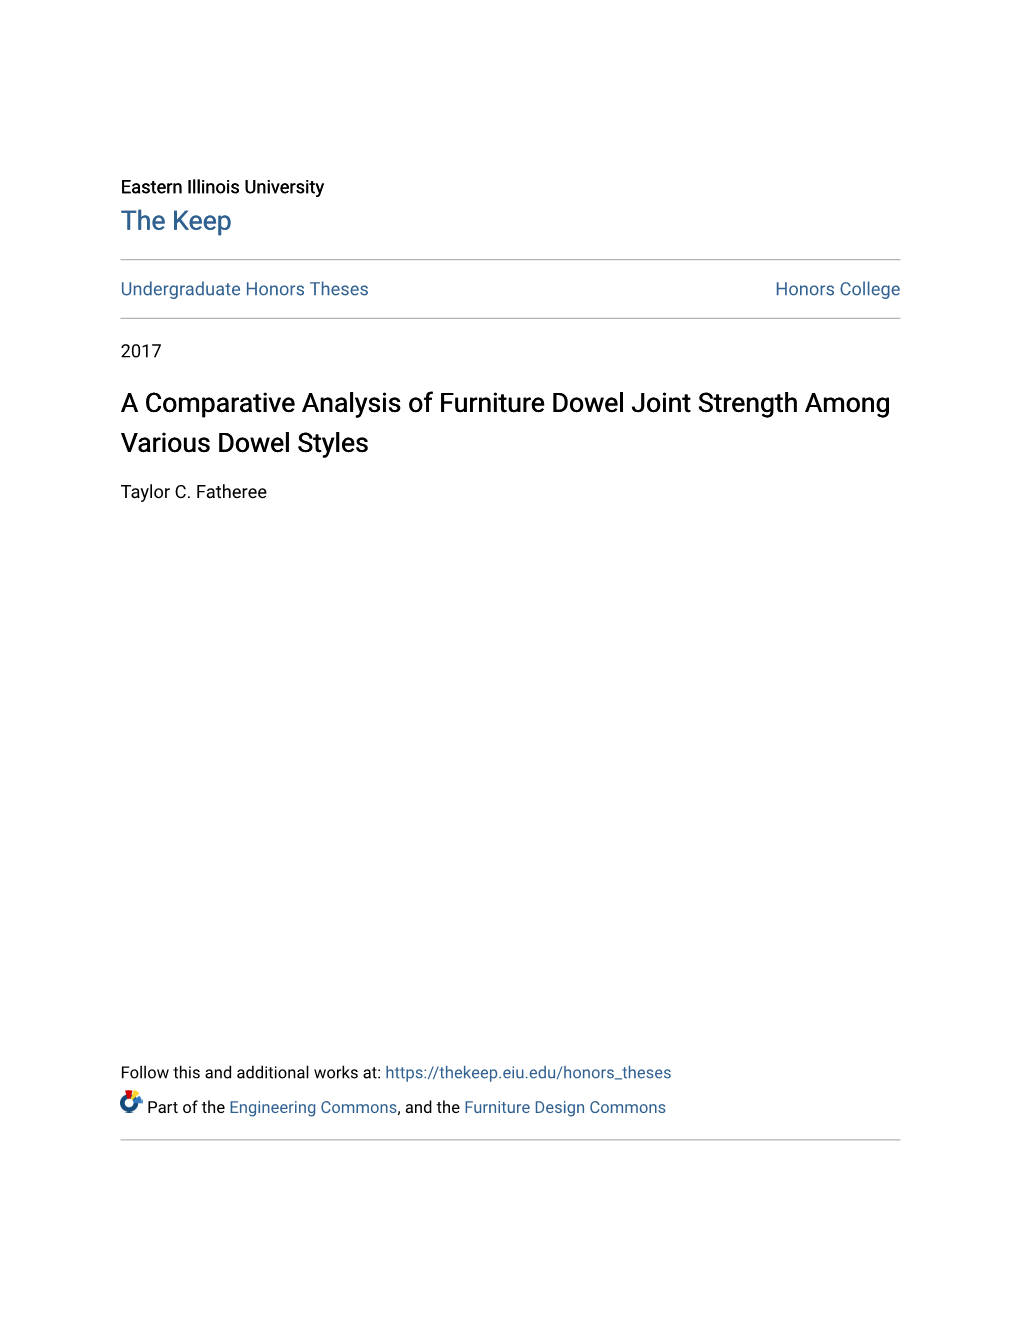 A Comparative Analysis of Furniture Dowel Joint Strength Among Various Dowel Styles